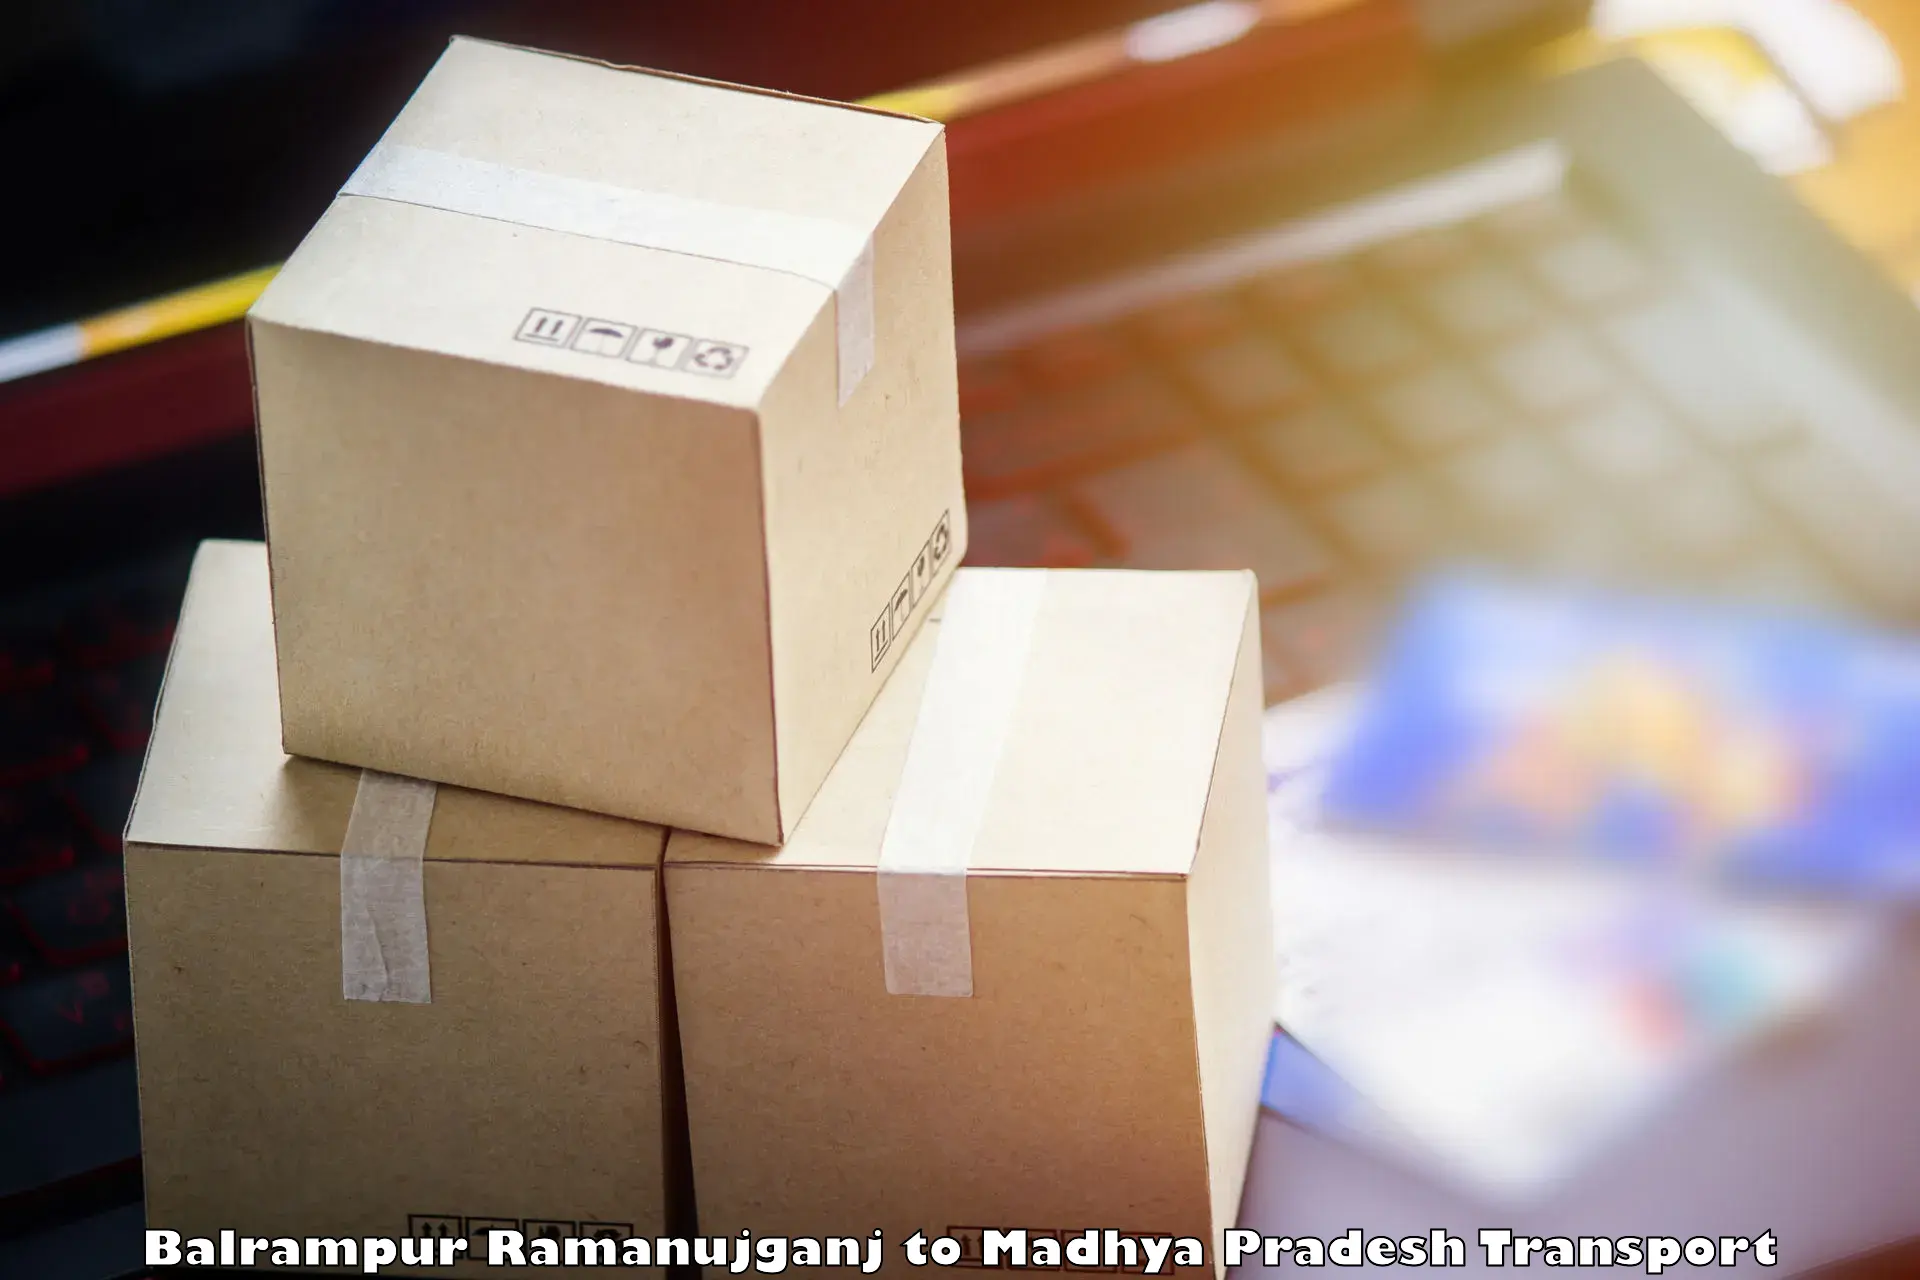 Package delivery services Balrampur Ramanujganj to Bargawan